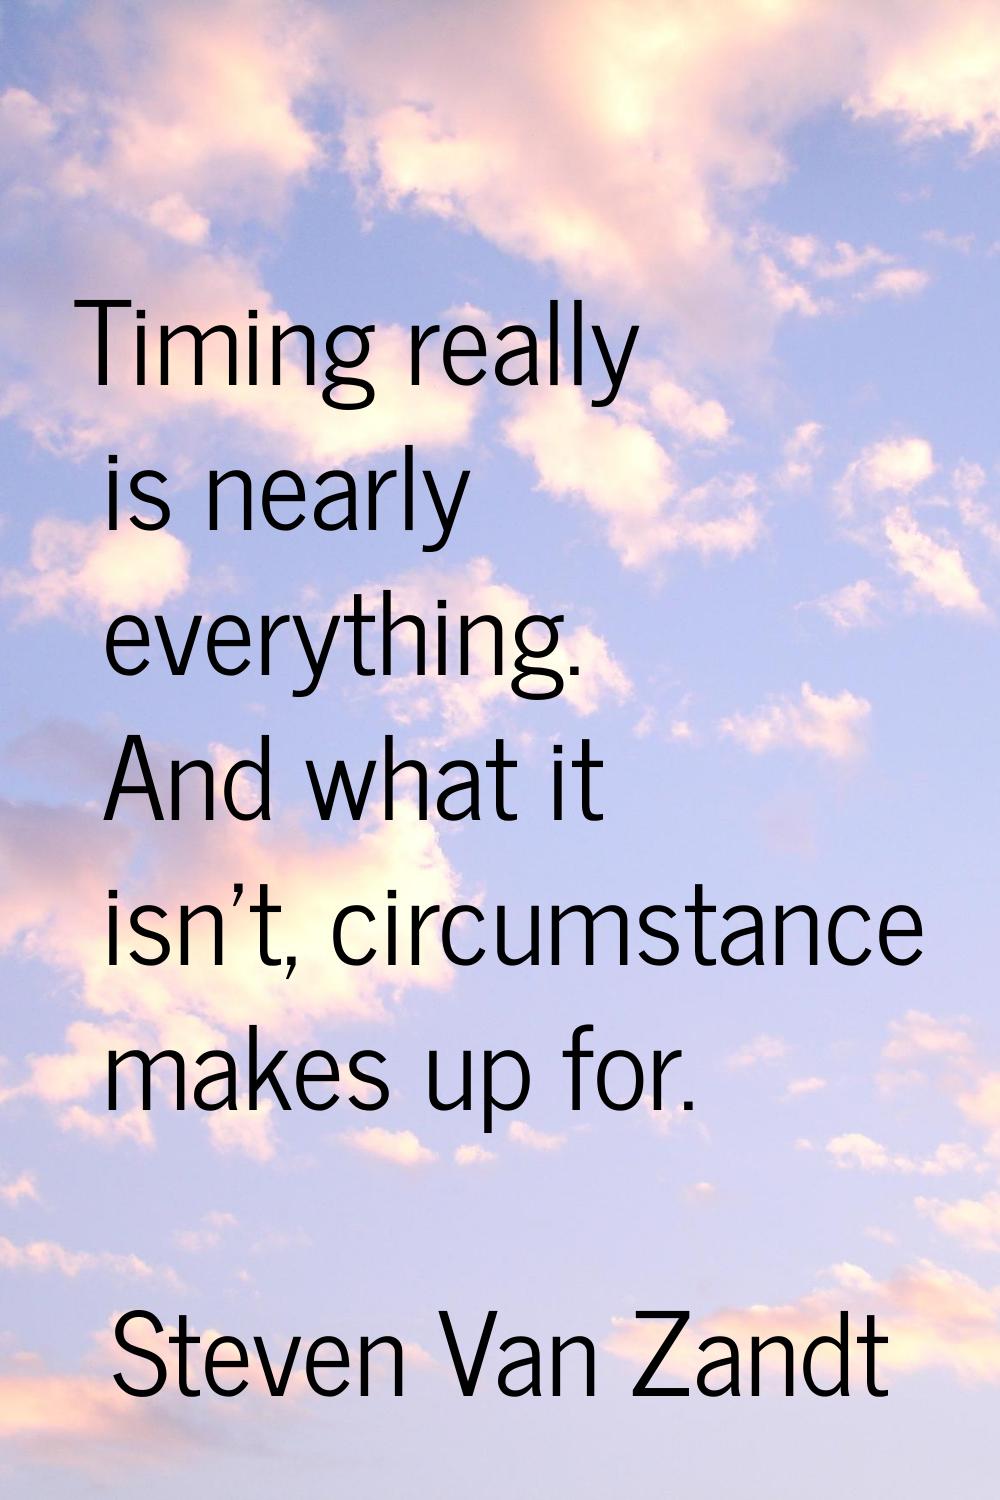 Timing really is nearly everything. And what it isn't, circumstance makes up for.